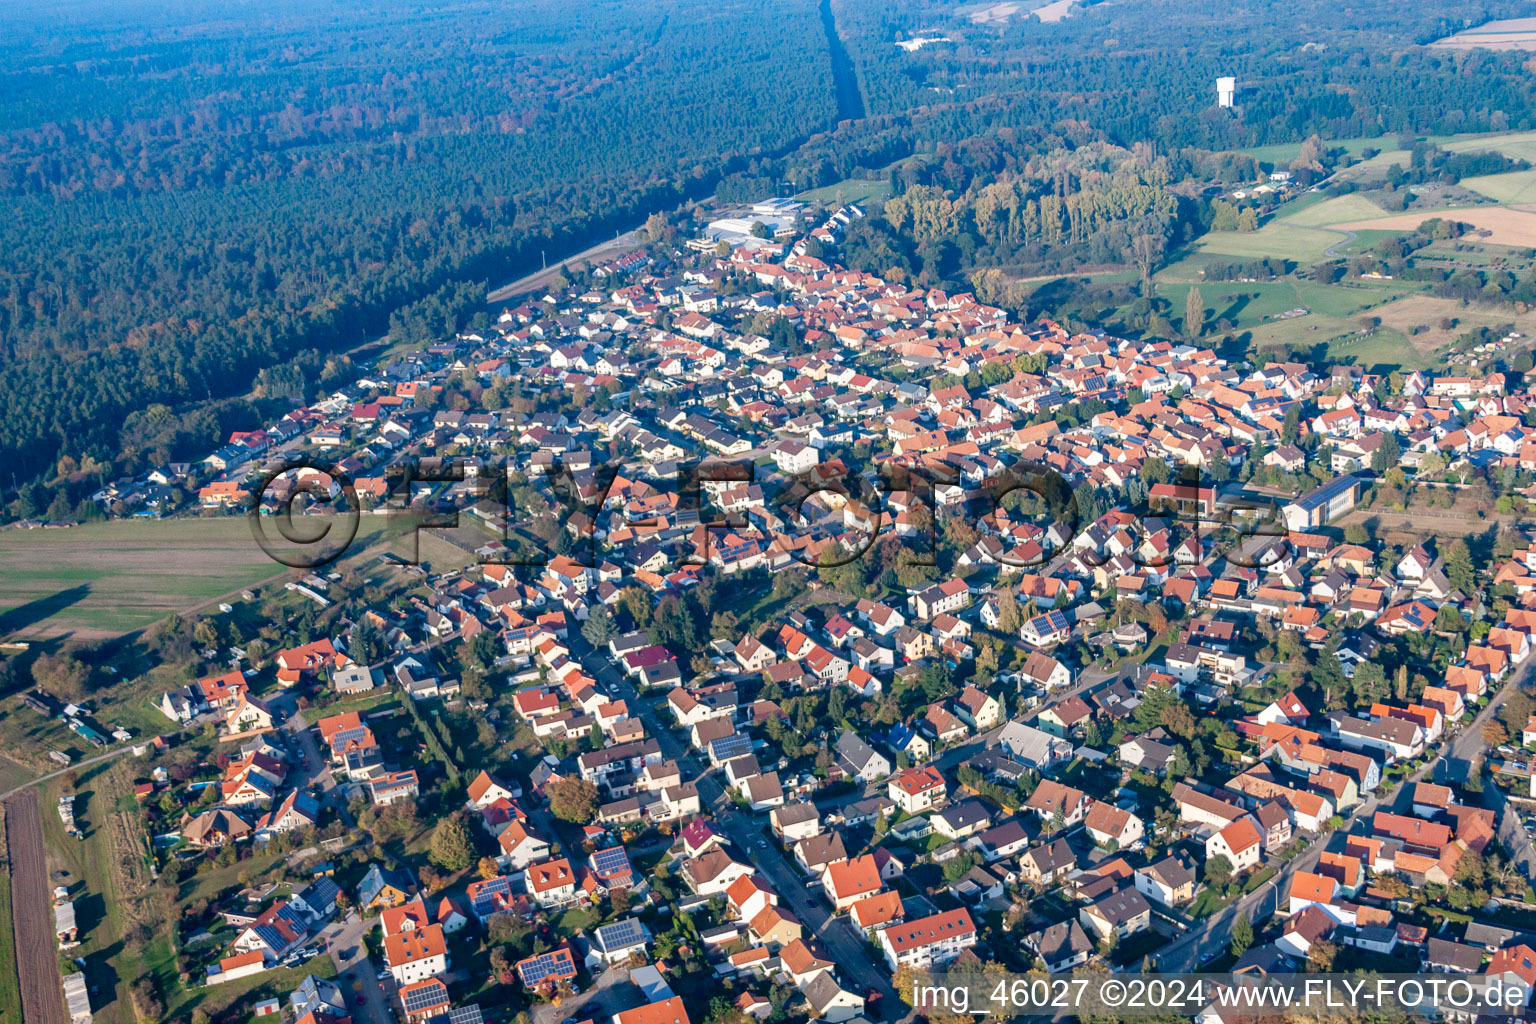 Berg in the state Rhineland-Palatinate, Germany from the drone perspective